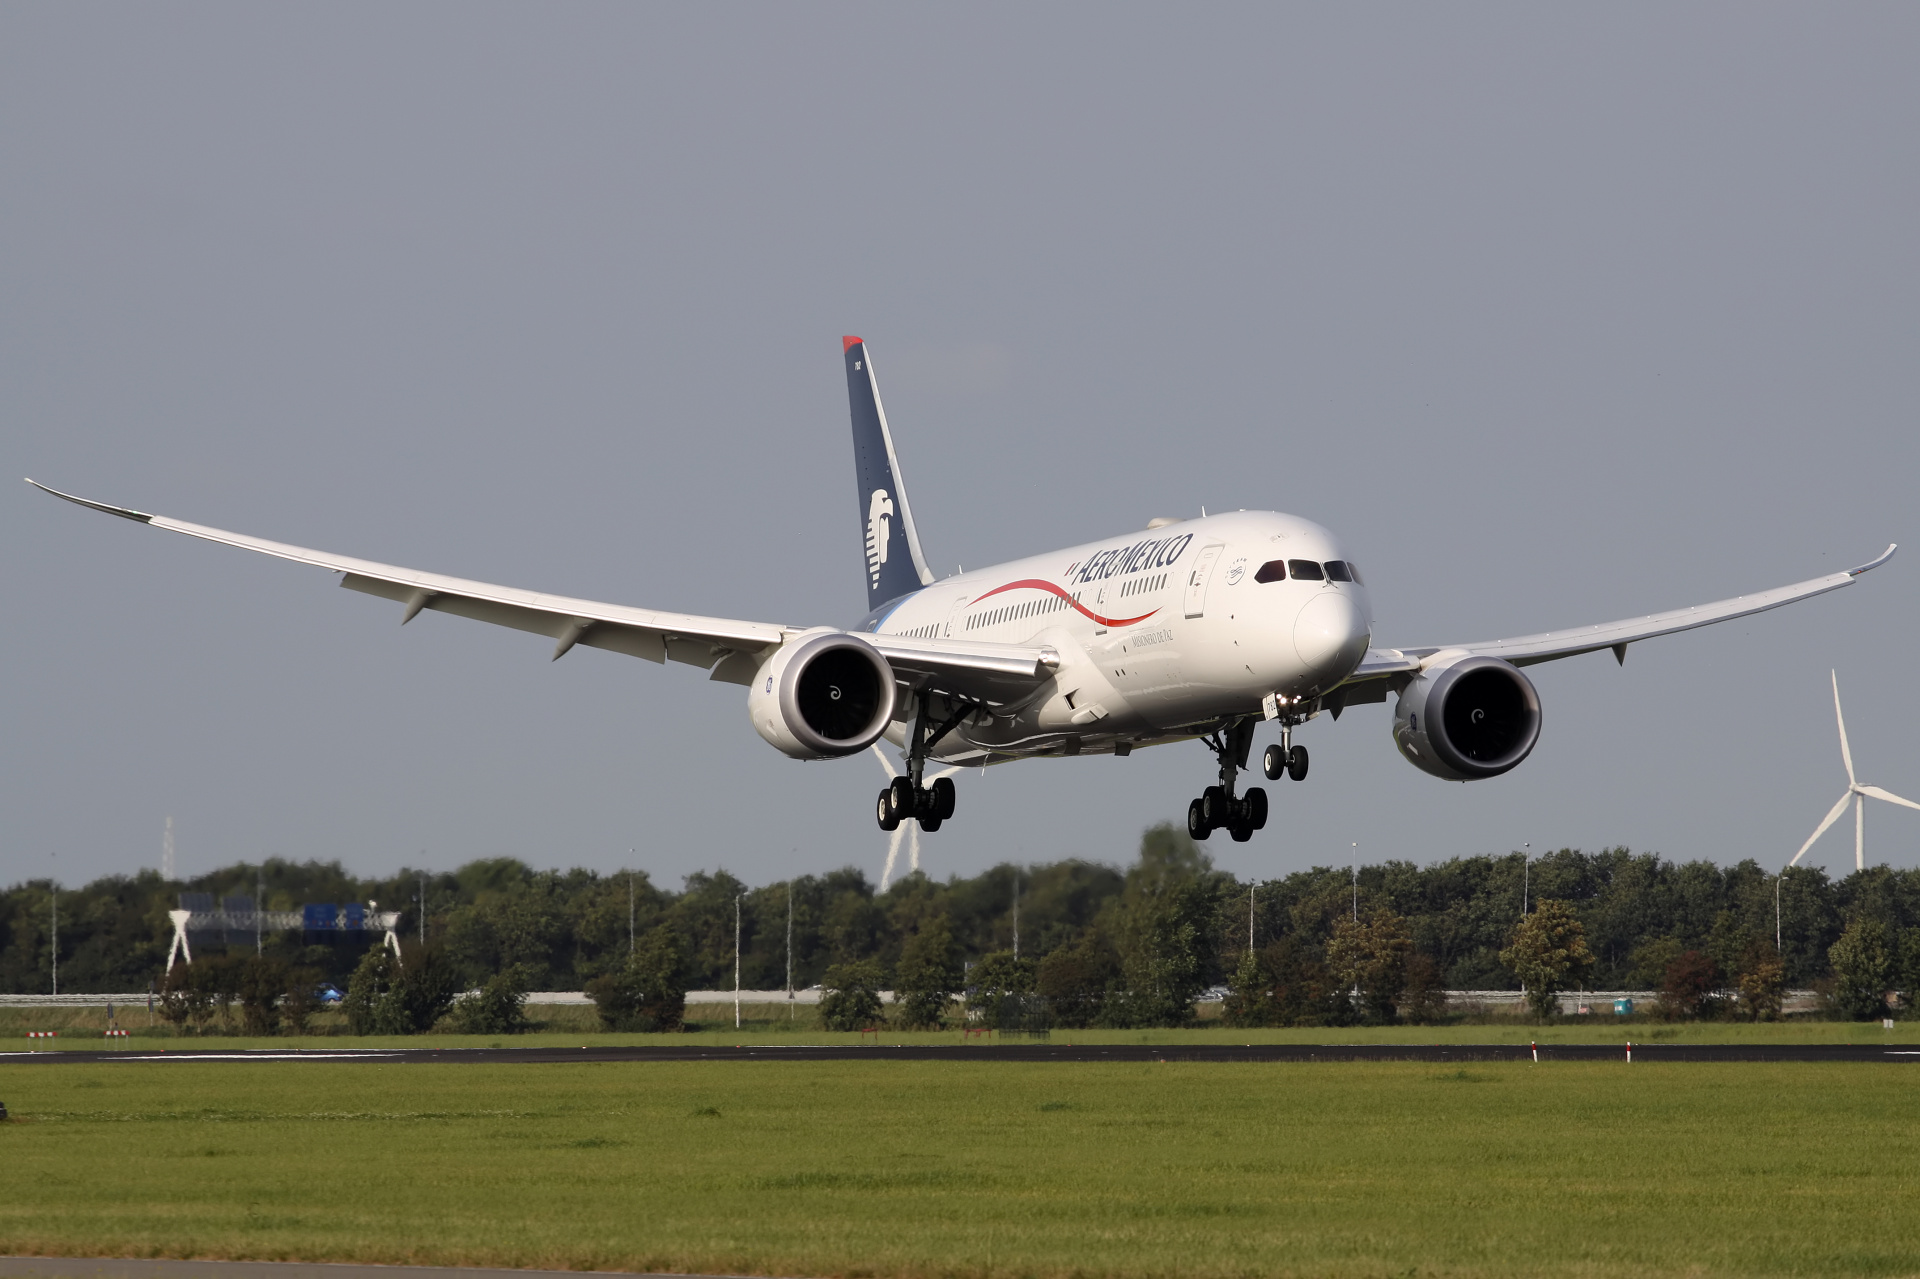 N782AM, AeroMexico (Aircraft » Schiphol Spotting » Boeing 787-8 Dreamliner)